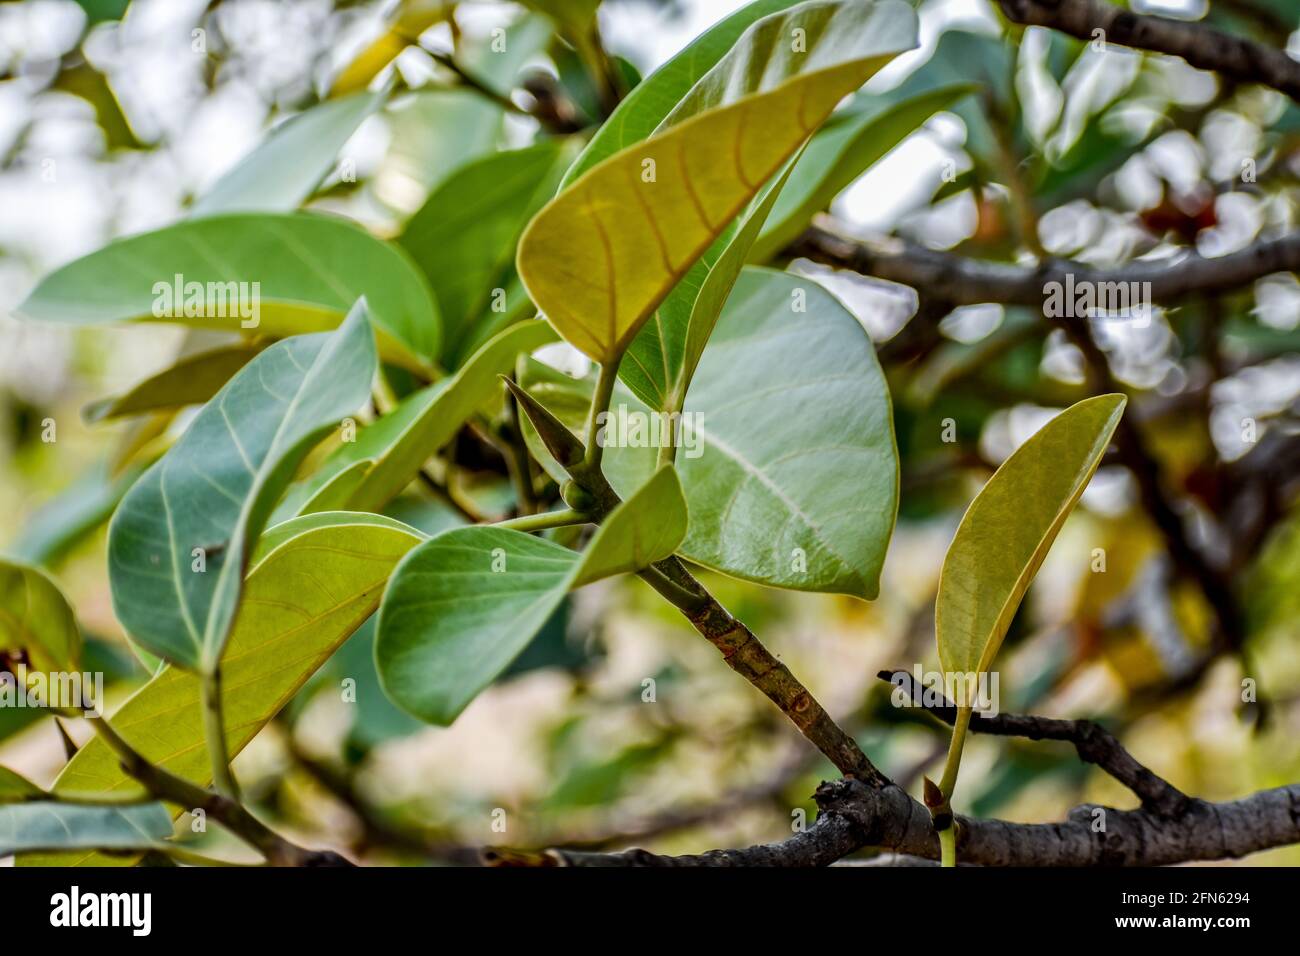 indian national tree Ficus benghalensis or Banyan fruit close view snap from a rural village looking awesome with greenery leaves & small tree trunk. Stock Photo